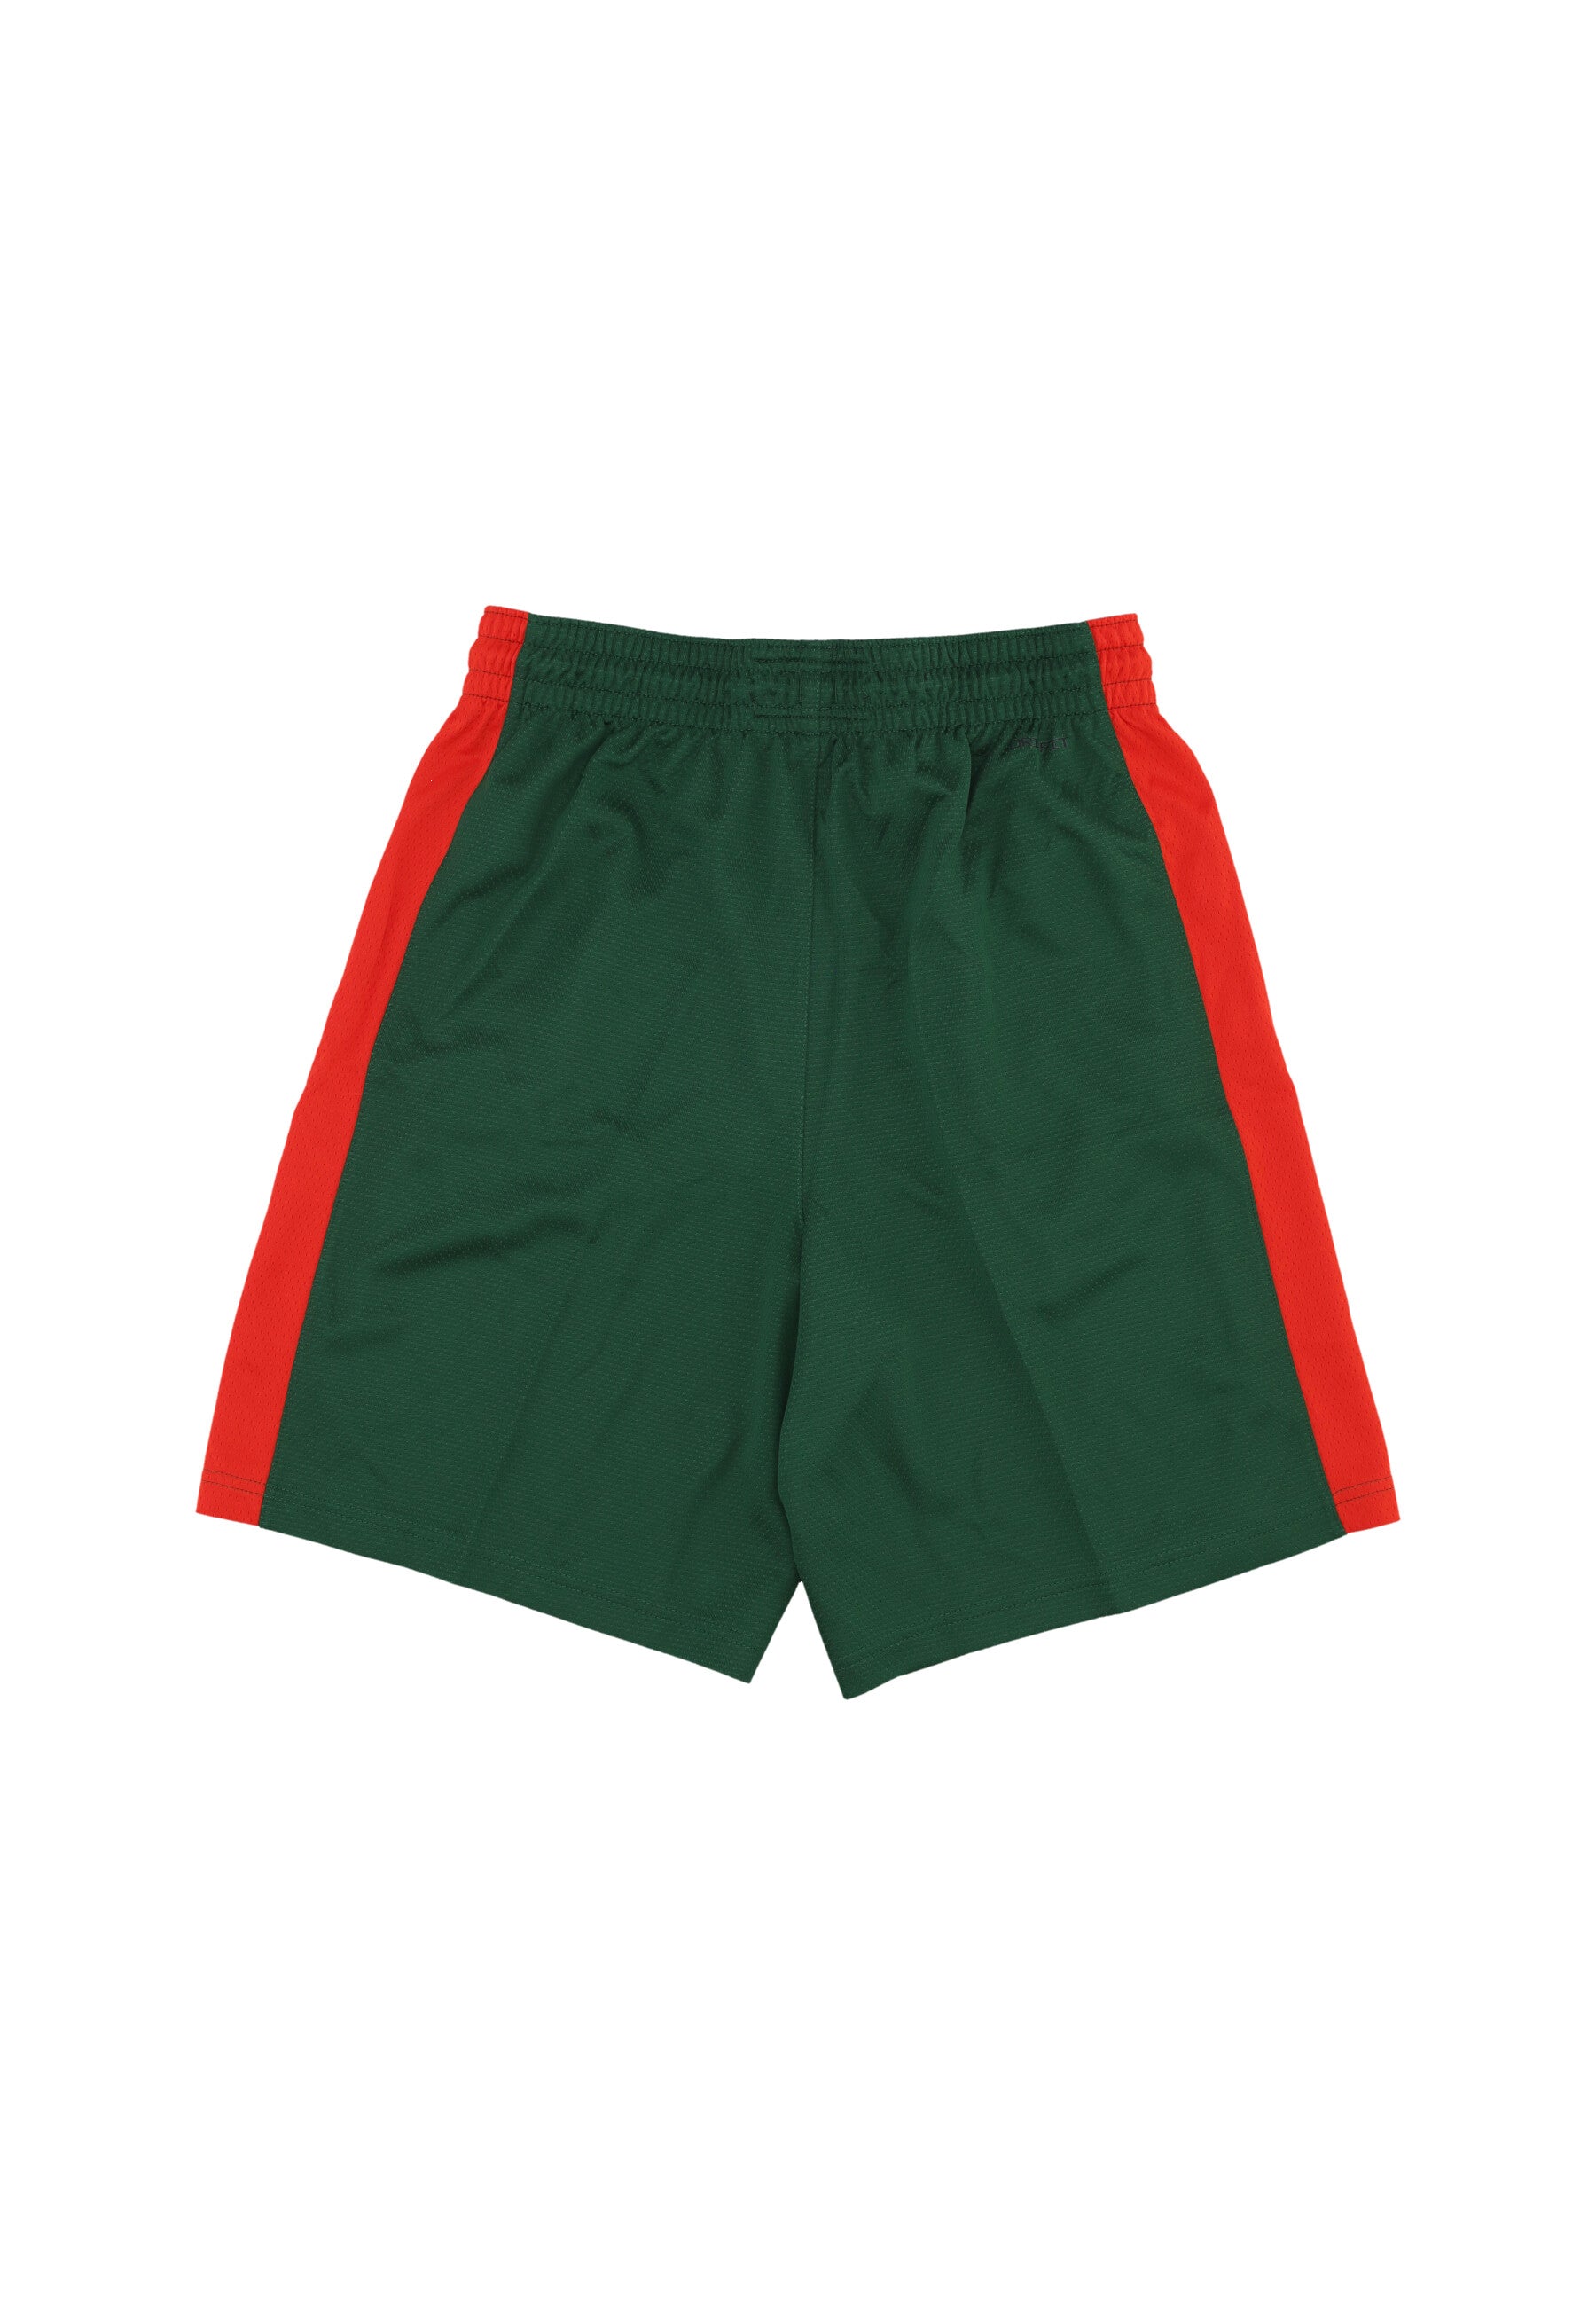 Pantaloncino Basket Uomo Limited Road Basketball Short Team Lithuania Gorge Green/chile Red FQ0394-341